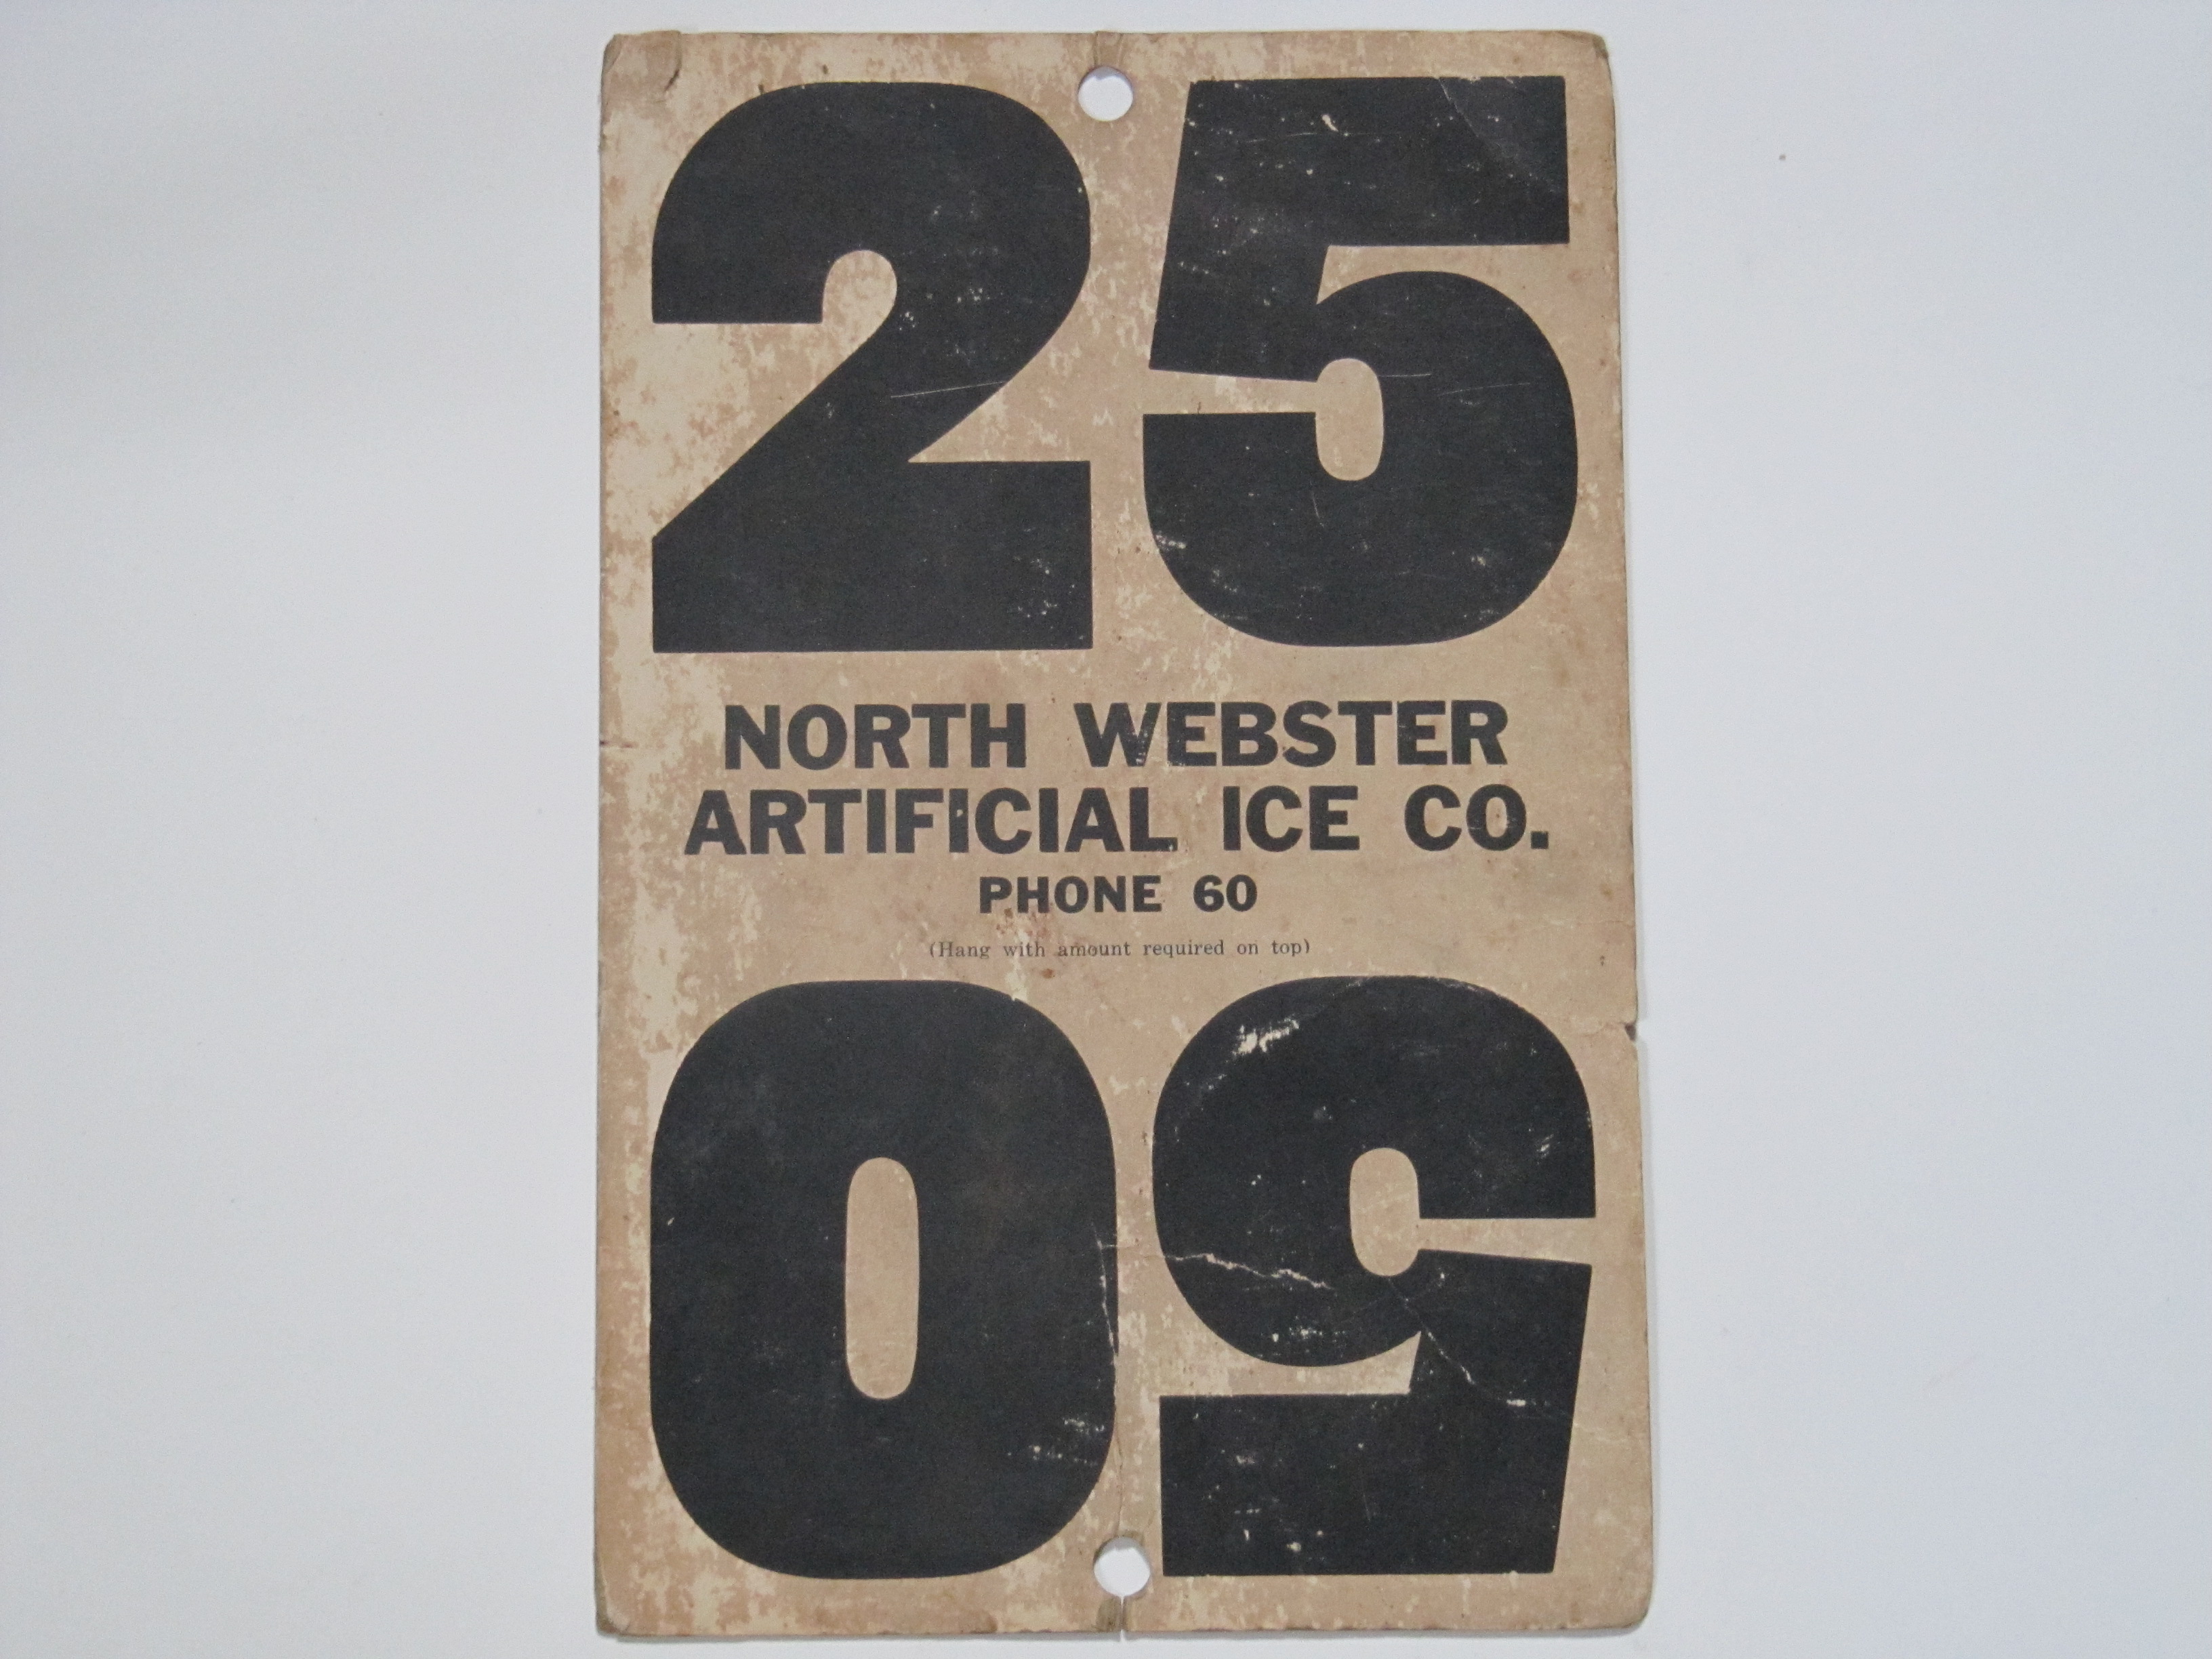 North Webster Artifical Ice Co.